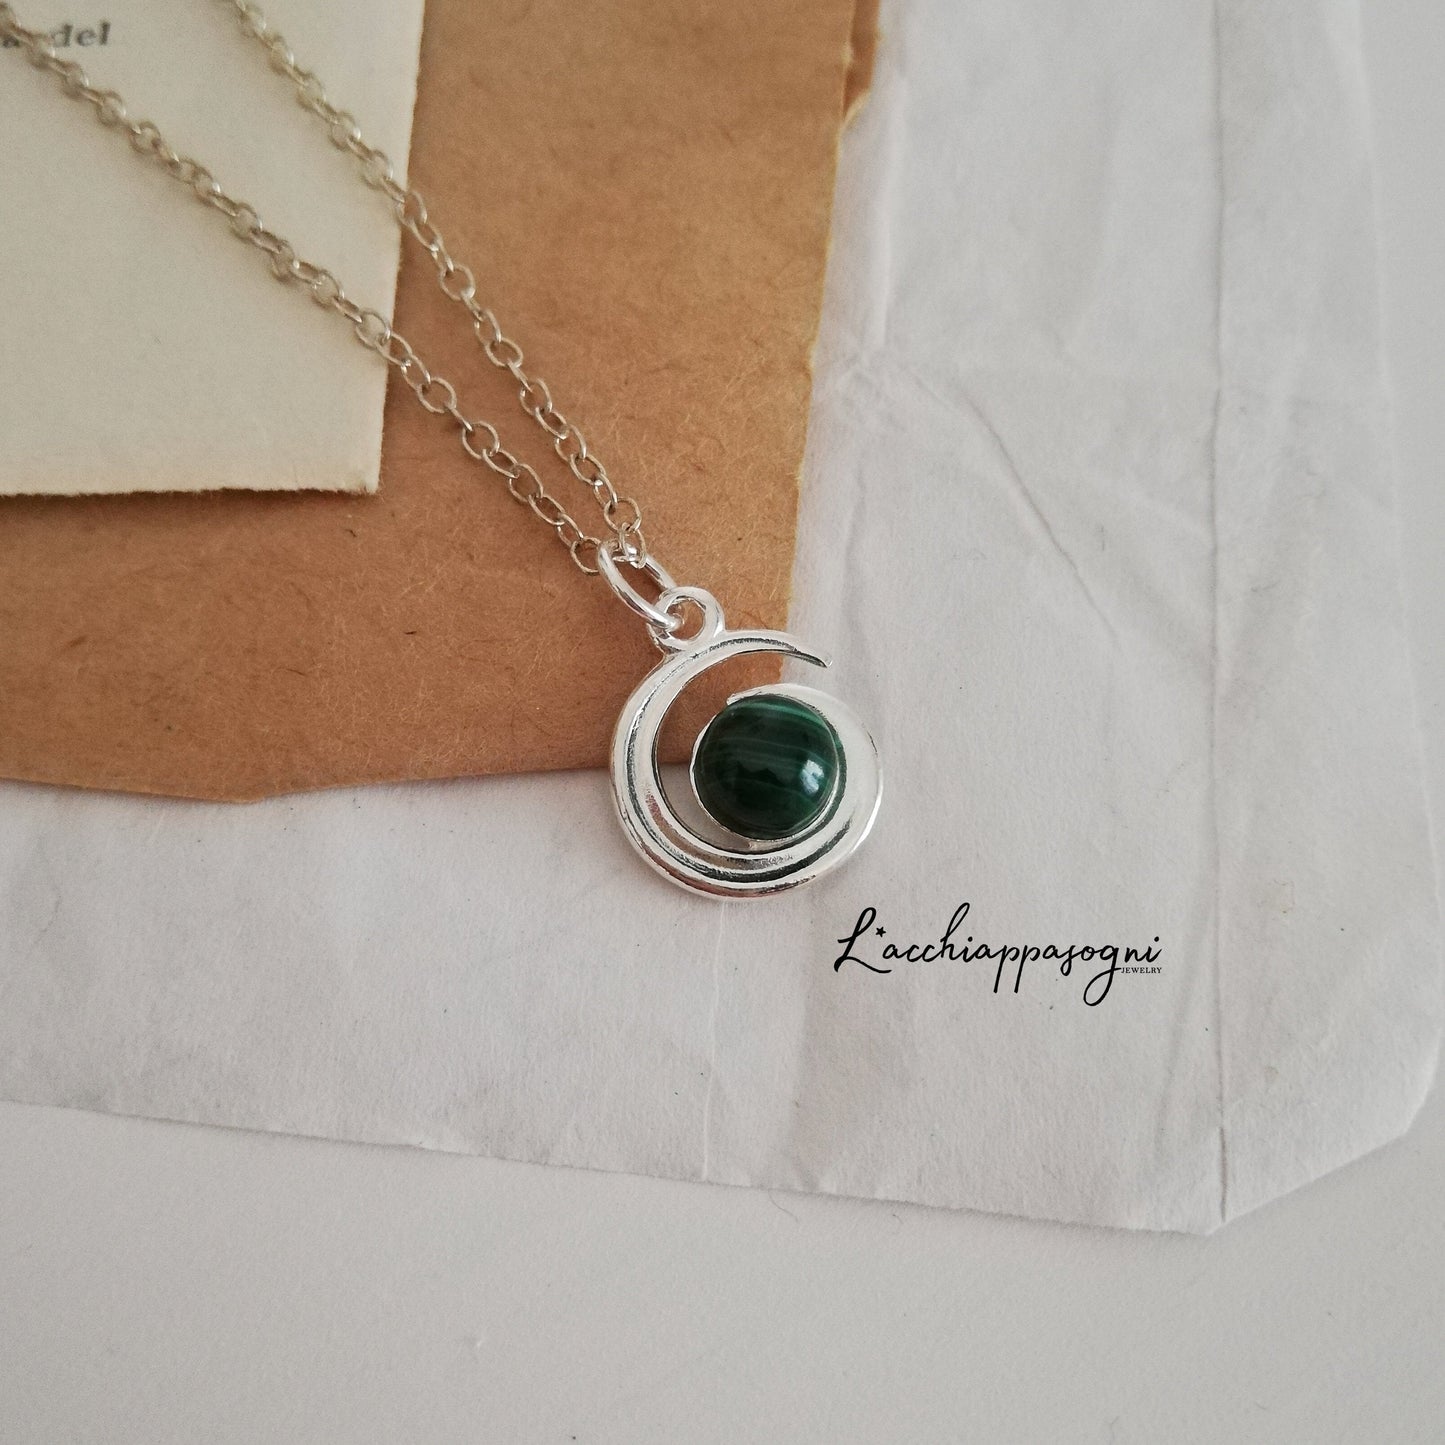 Witchy Moon Necklace, Wolf inspired Green Stone Necklace, Half Moon Necklace, version 2